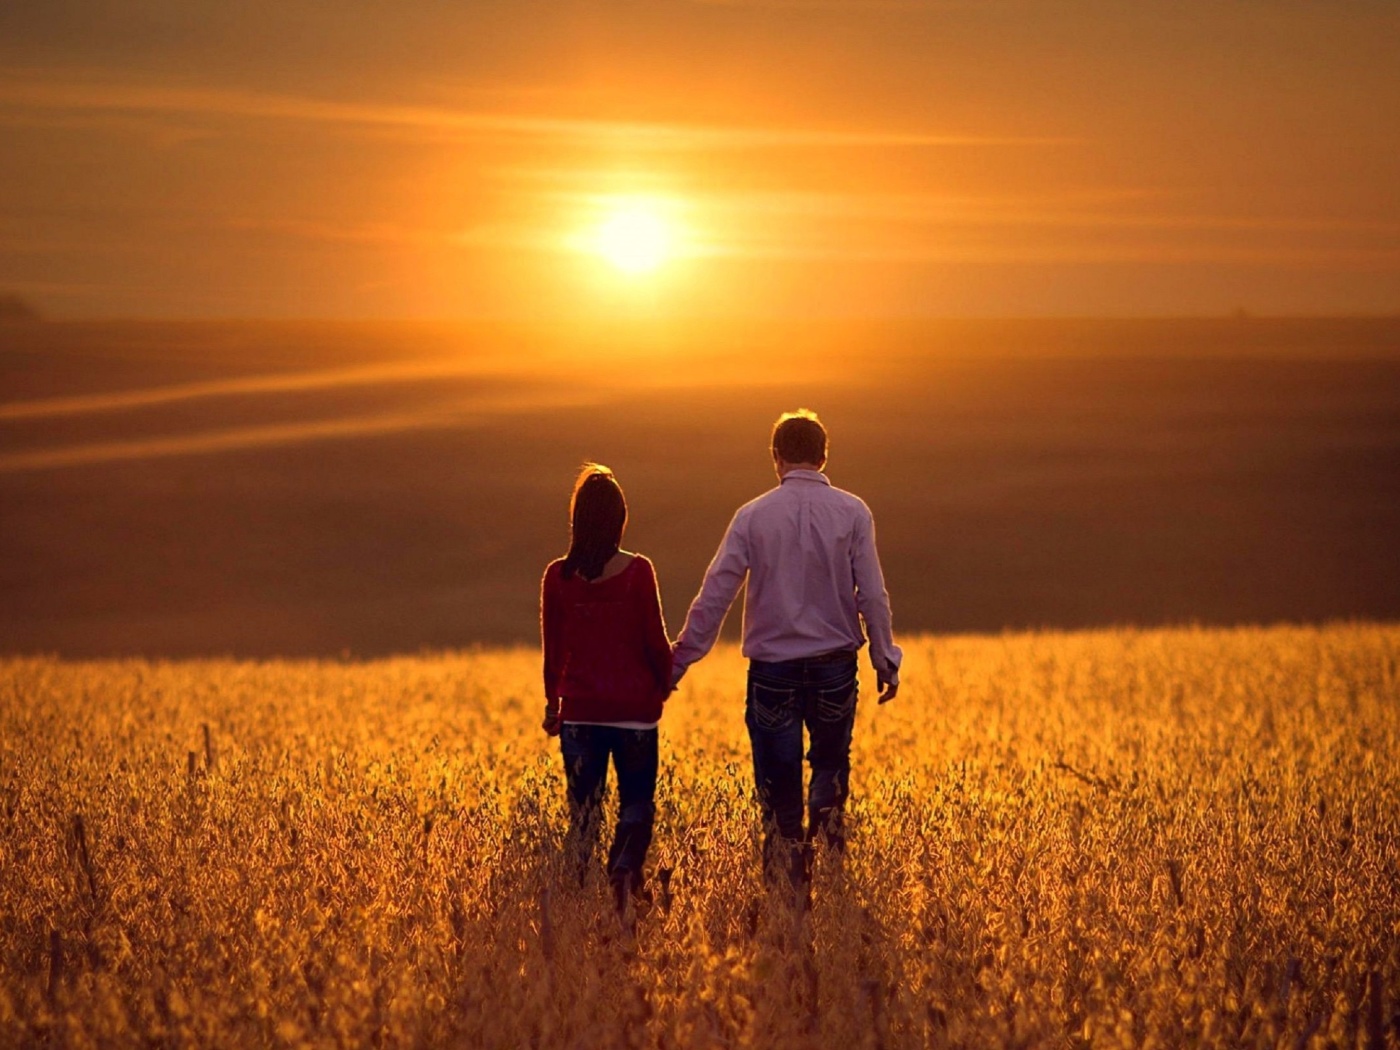 Couple at sunset wallpaper 1400x1050